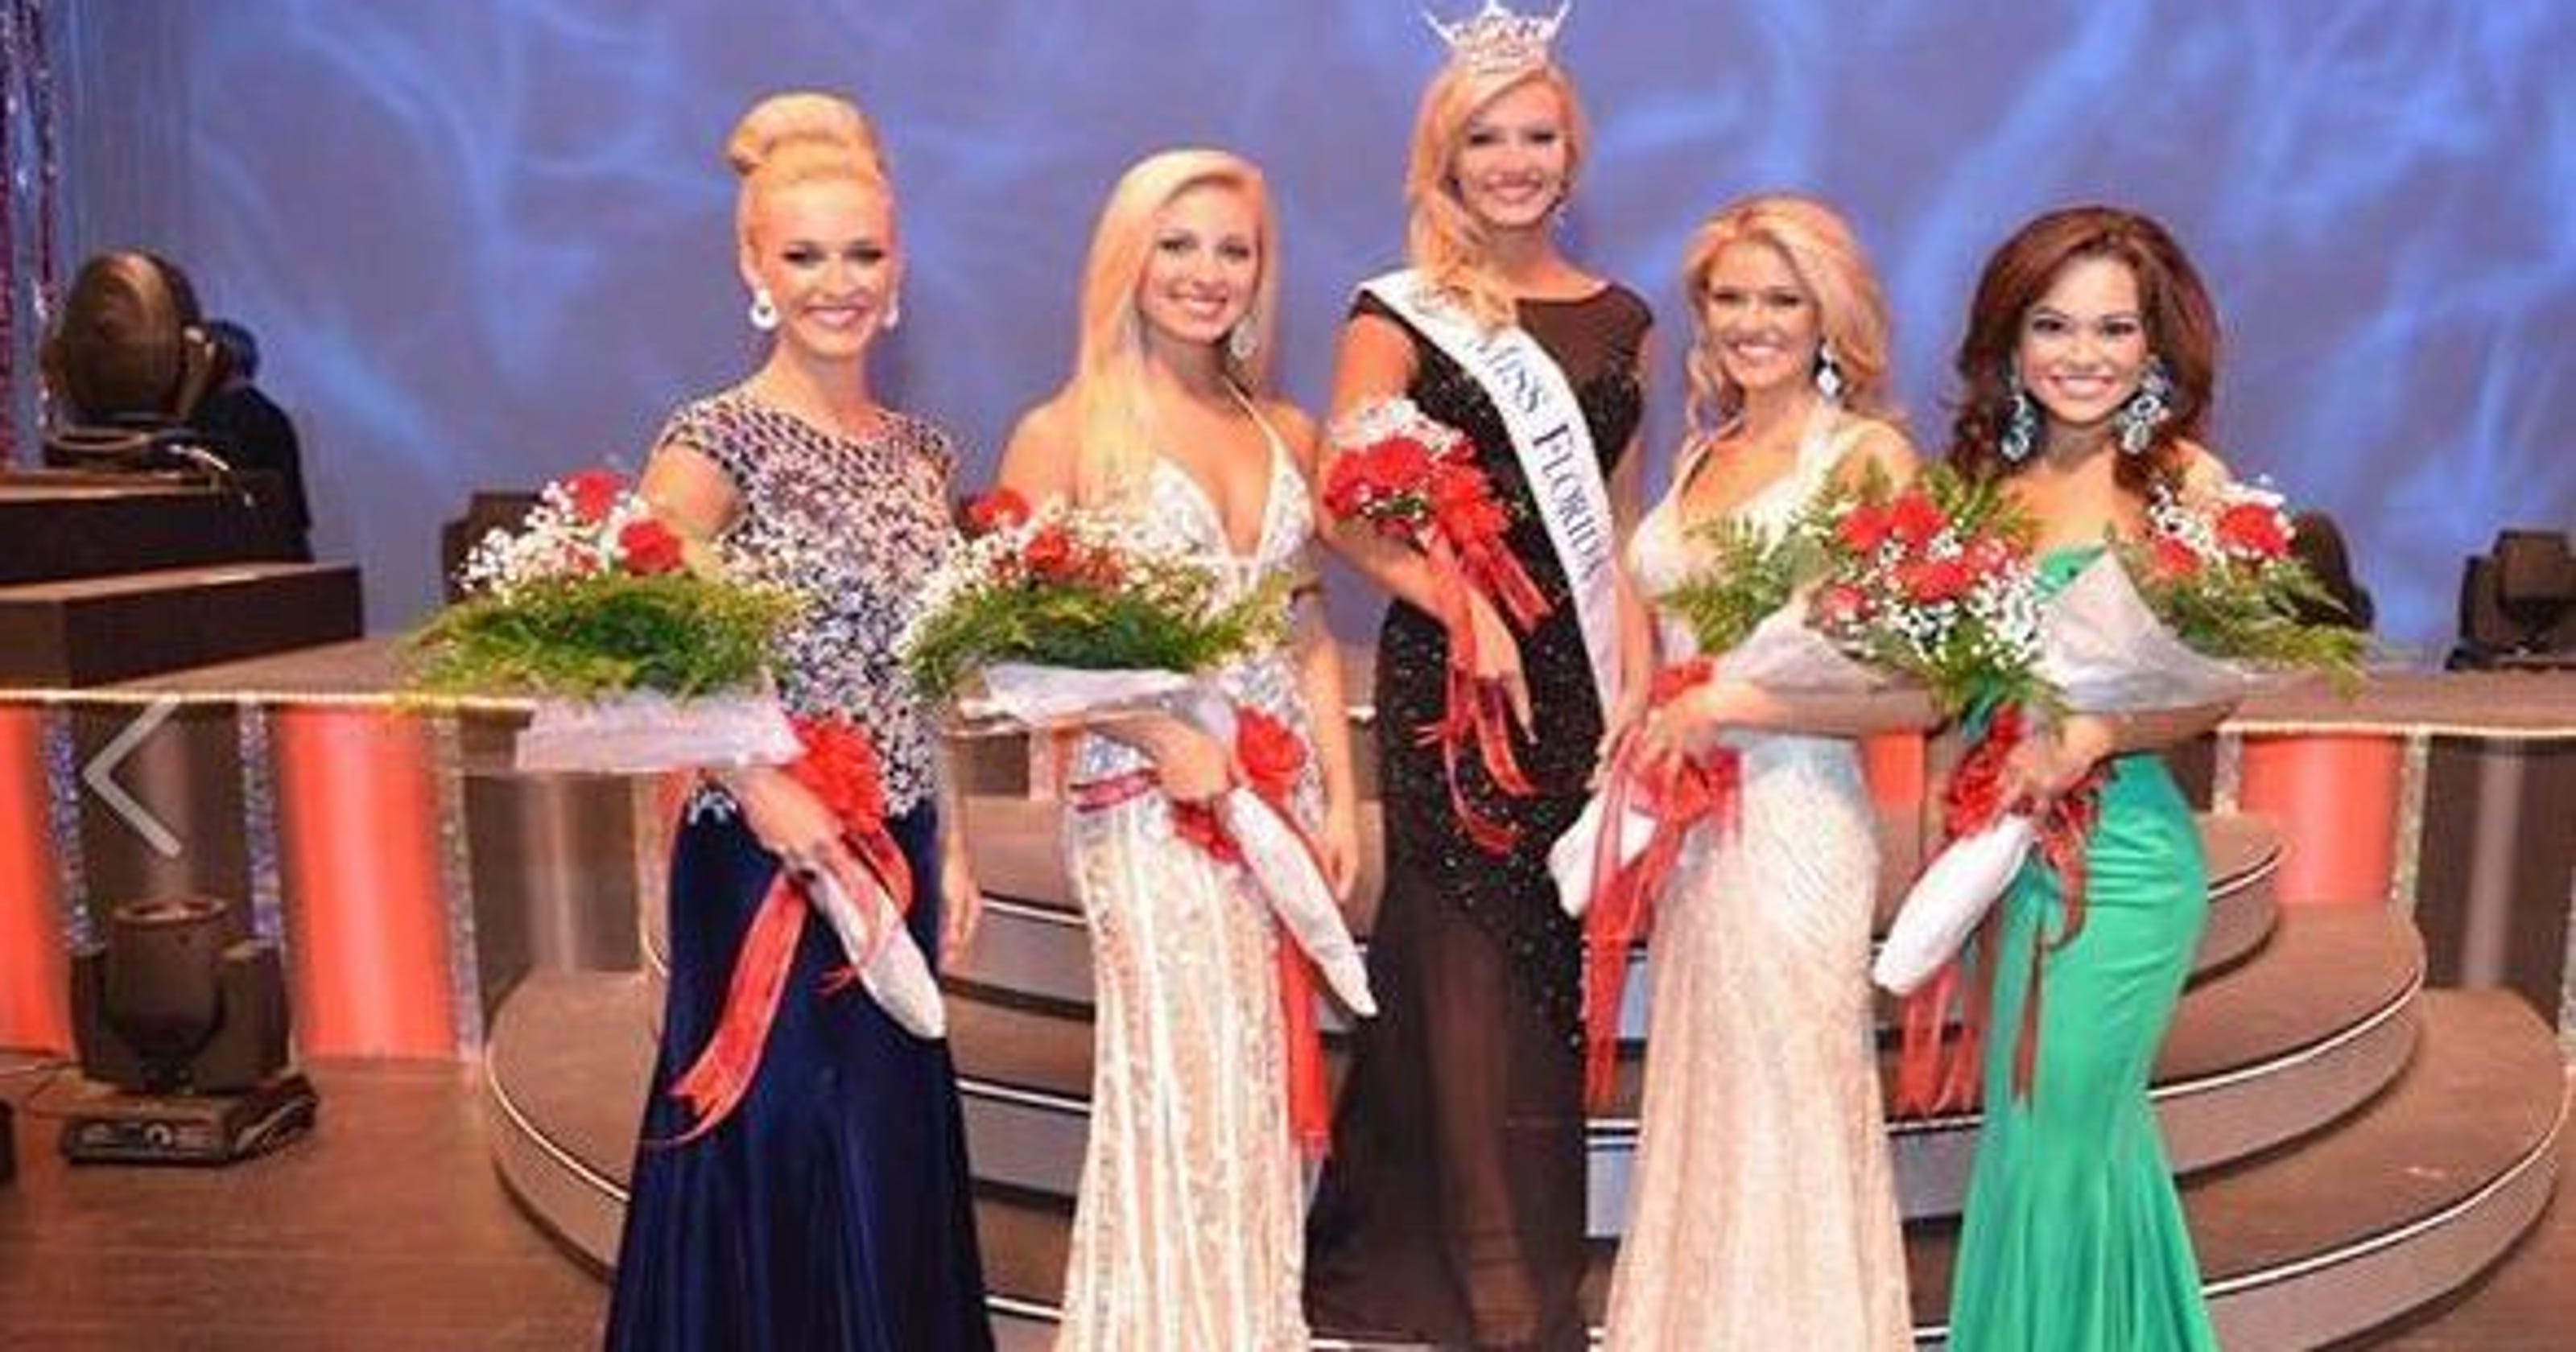 Miss Florida loses crown over scorin